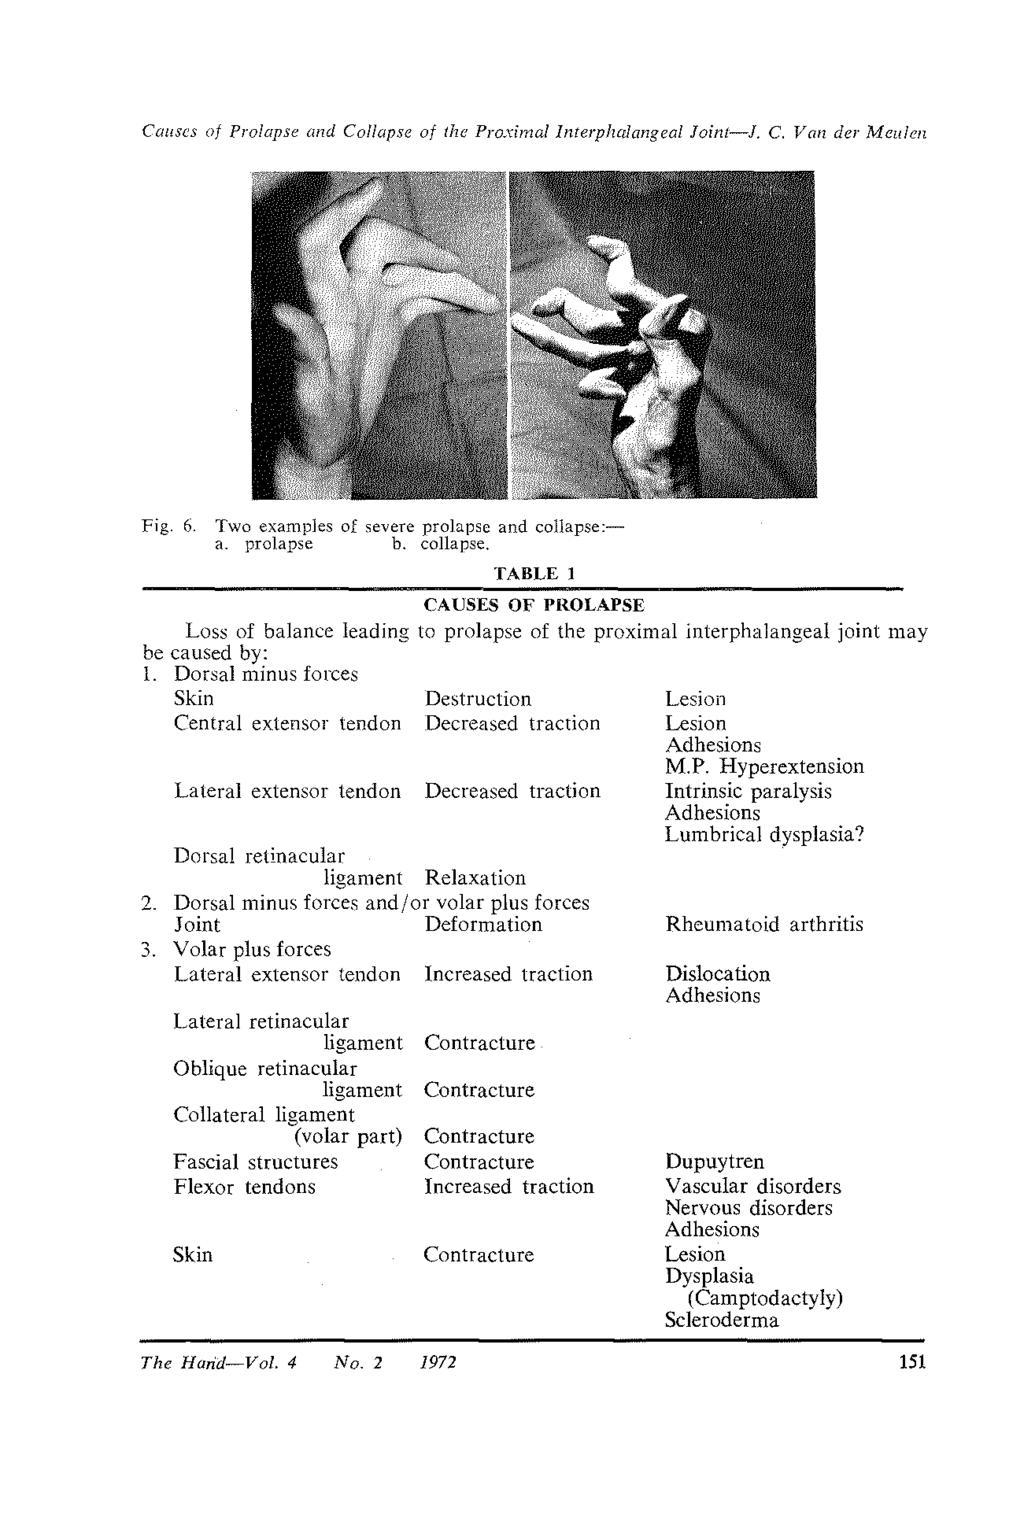 Causes of Prolapse and Collapse of the Pro.cimallnterphalangeal Joint-!. C. VanderMeulen Fig. 6. Two examples of severe prolapse and collapse: